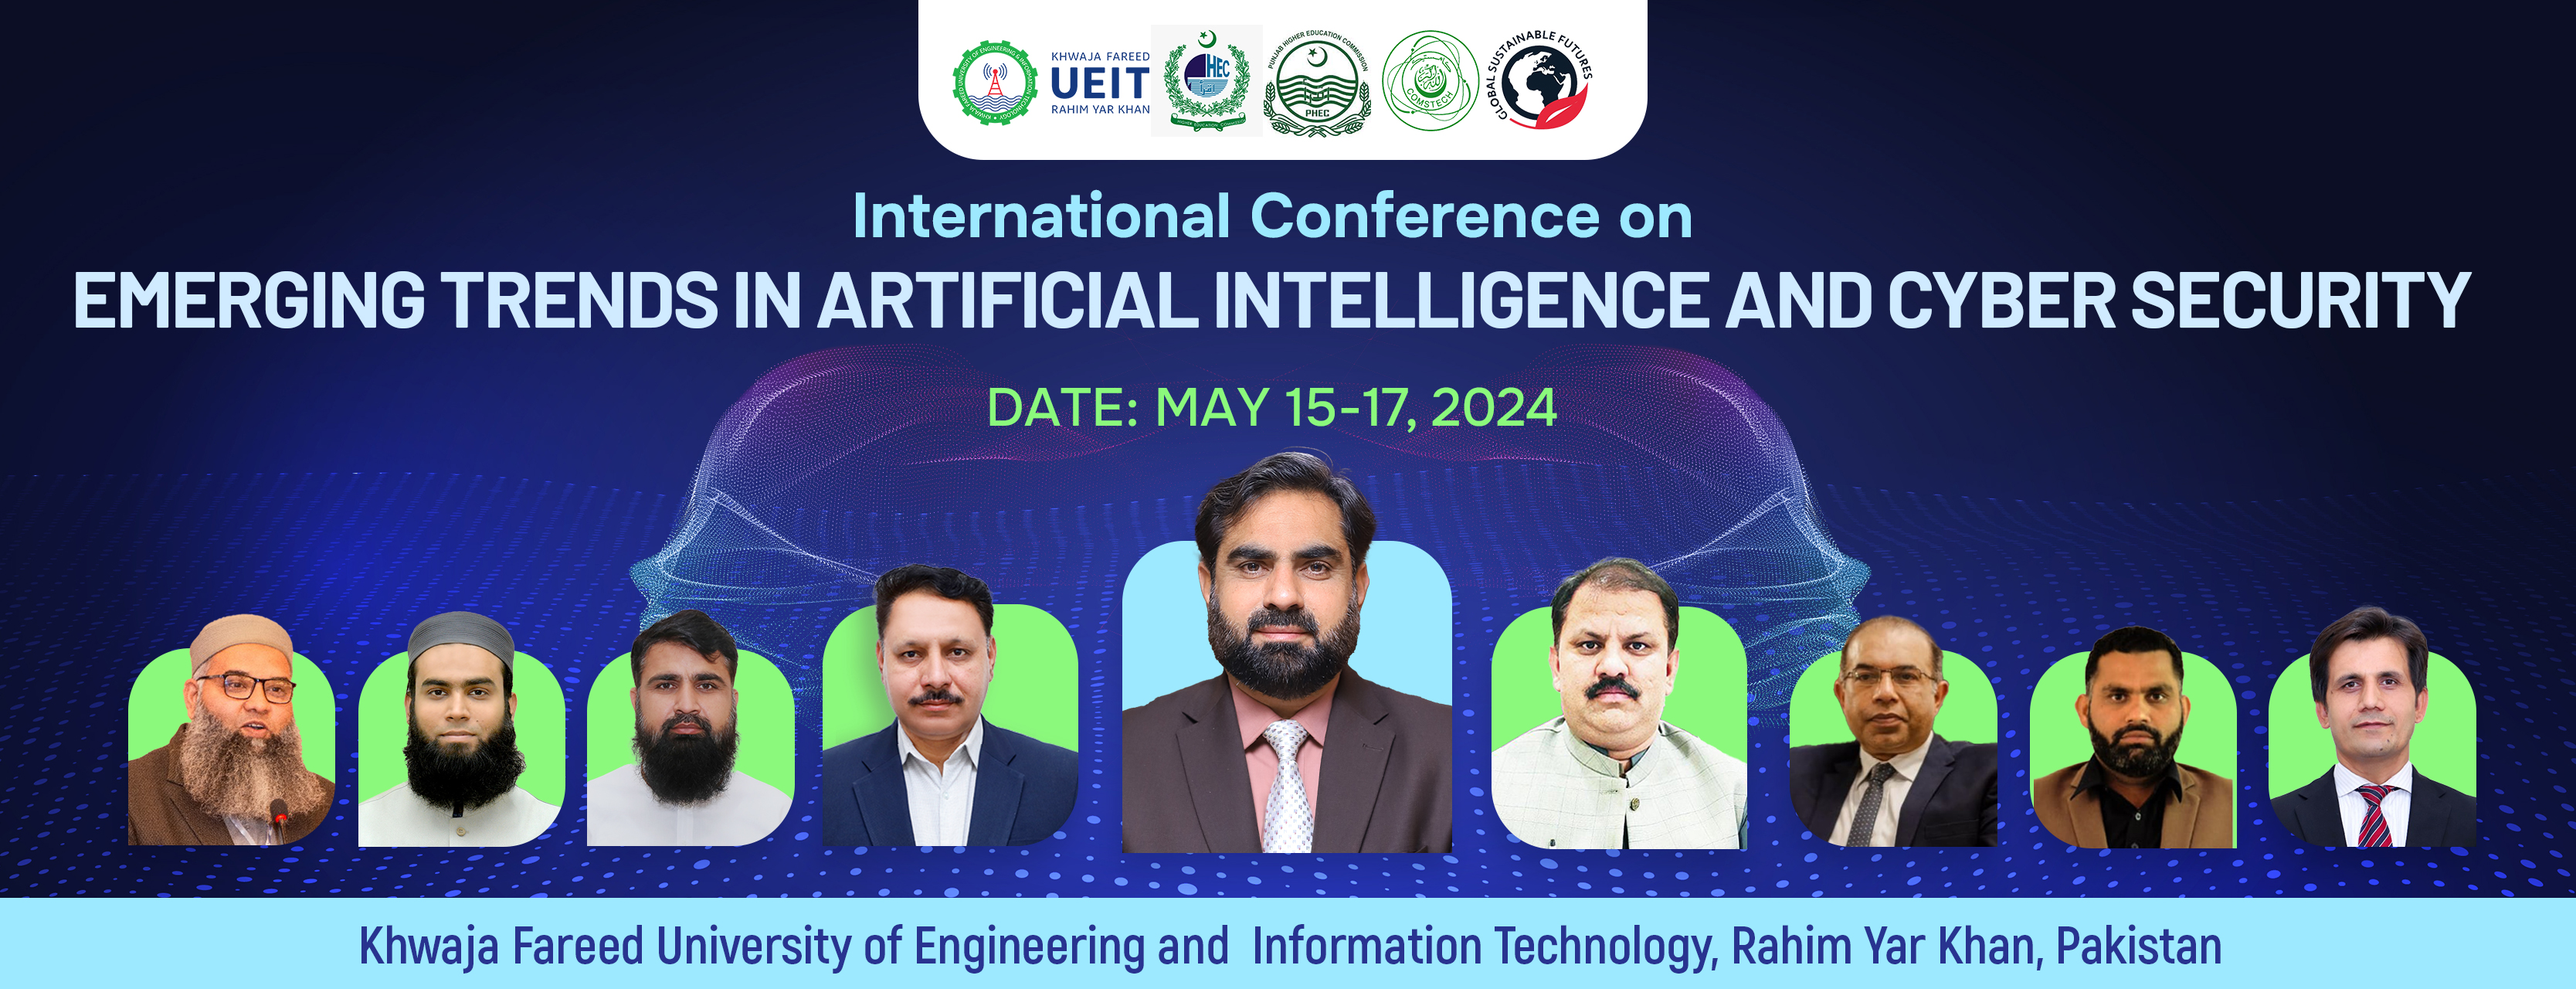 Website-Slider-International-Conference-on-Emerging-Trends-in-Artificial-Intelligence-and-Cyb